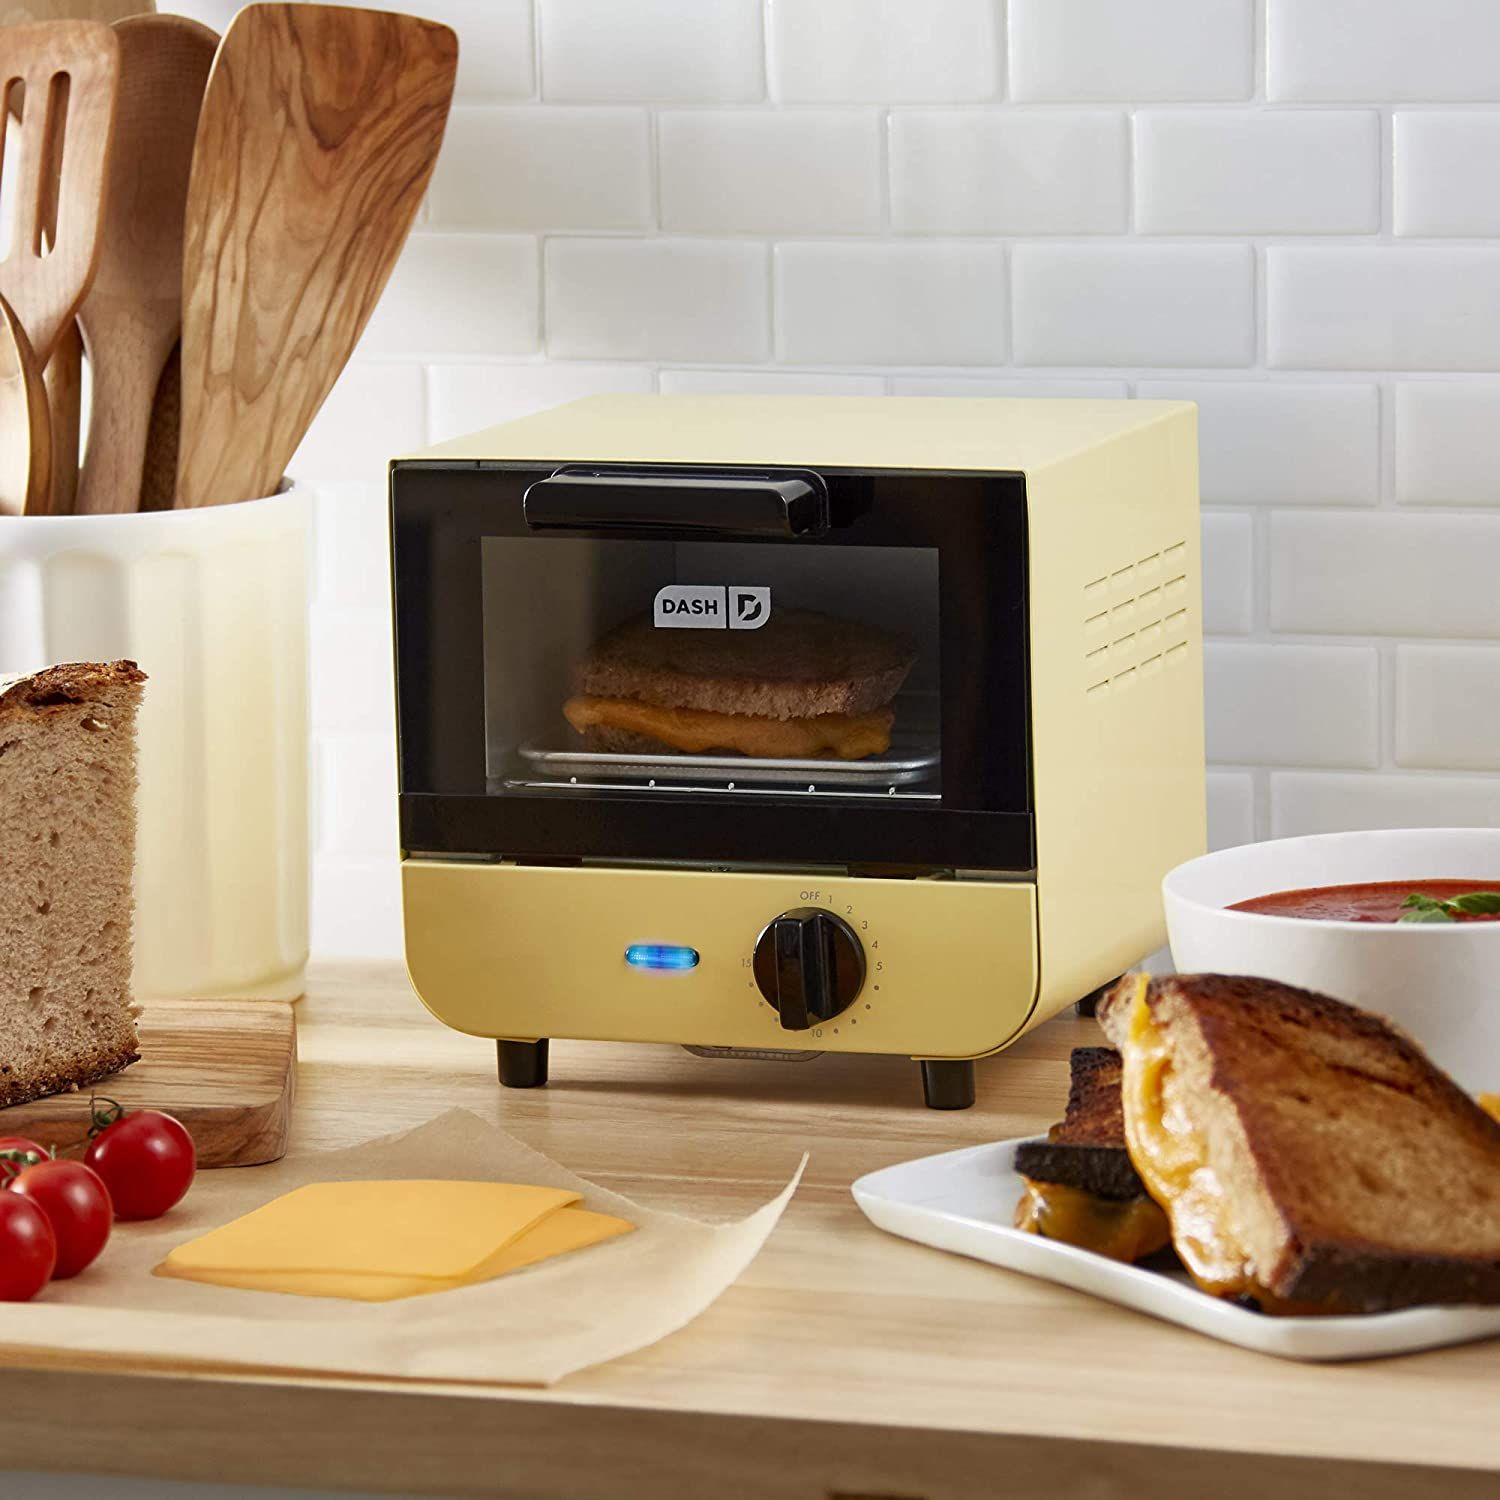 Dash Mini Toaster Oven  Nordstrom's Home Selection Just Blew Us